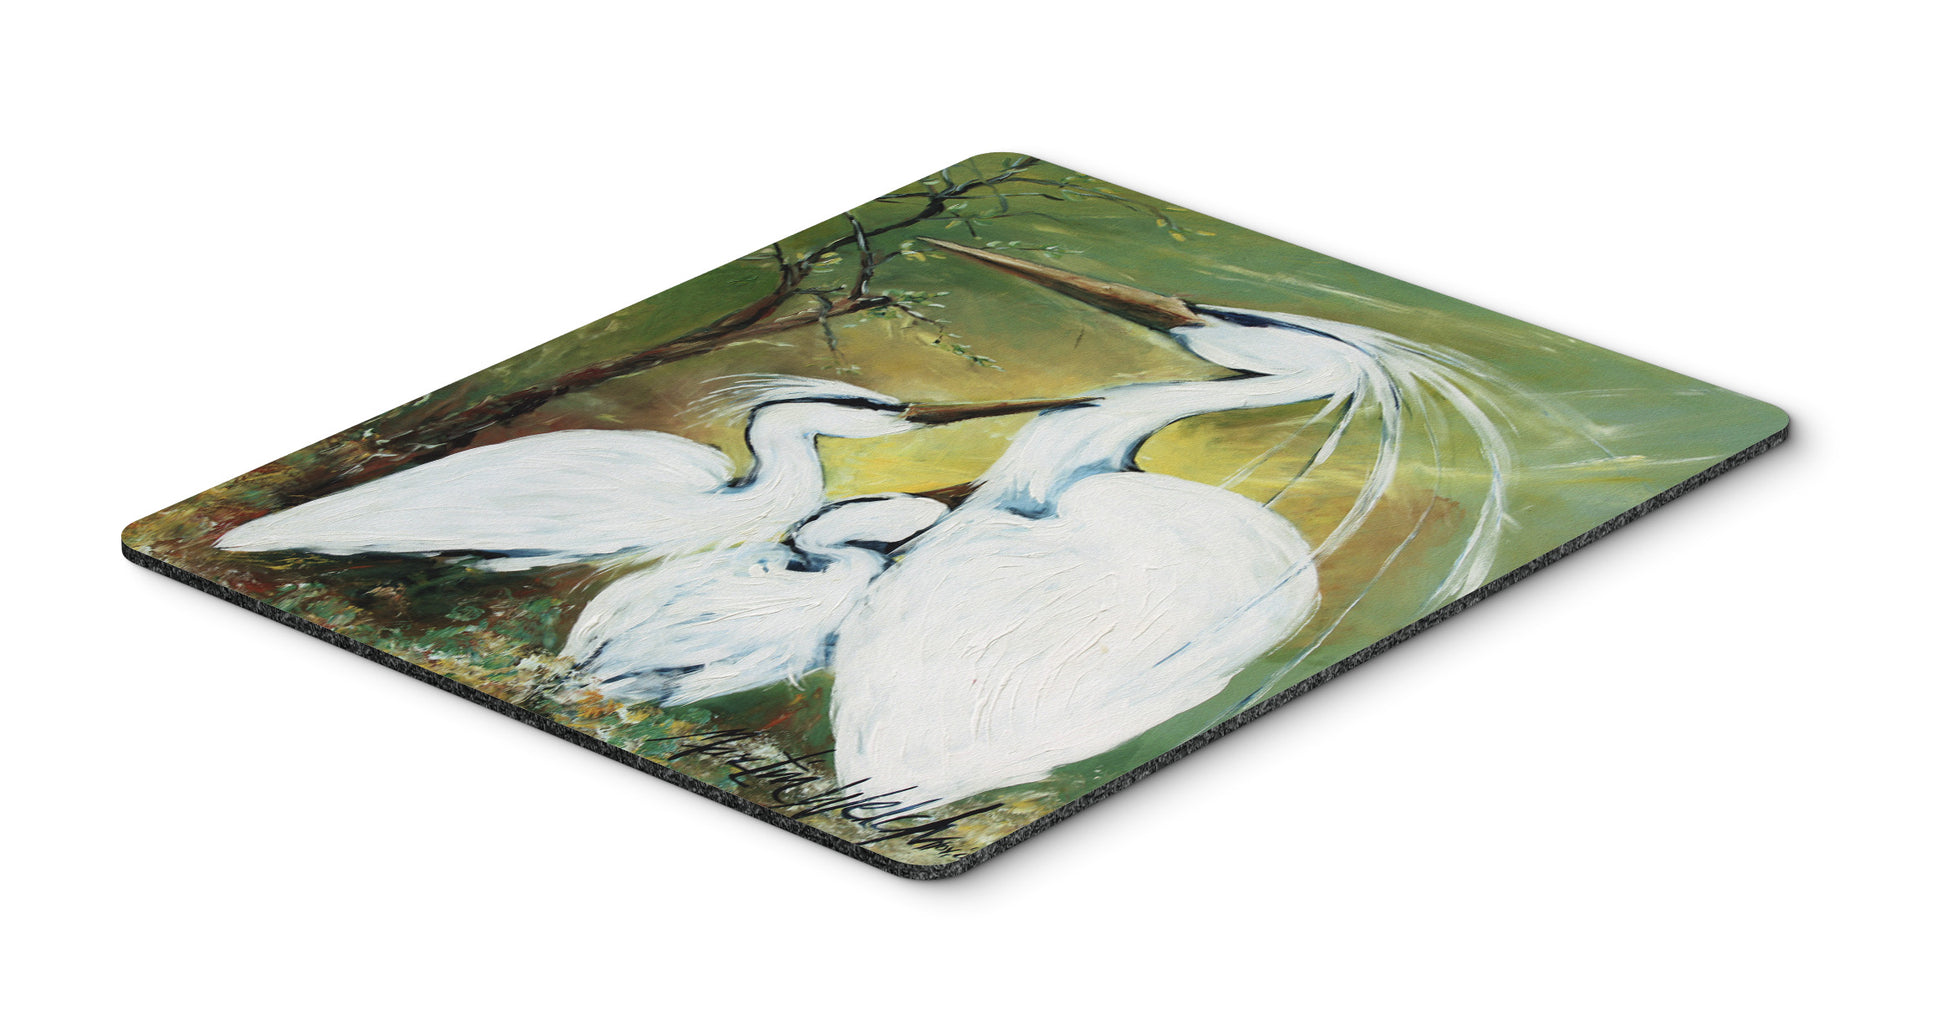 Buy this Blessing at Feeding Time Egret Family Mouse Pad, Hot Pad or Trivet